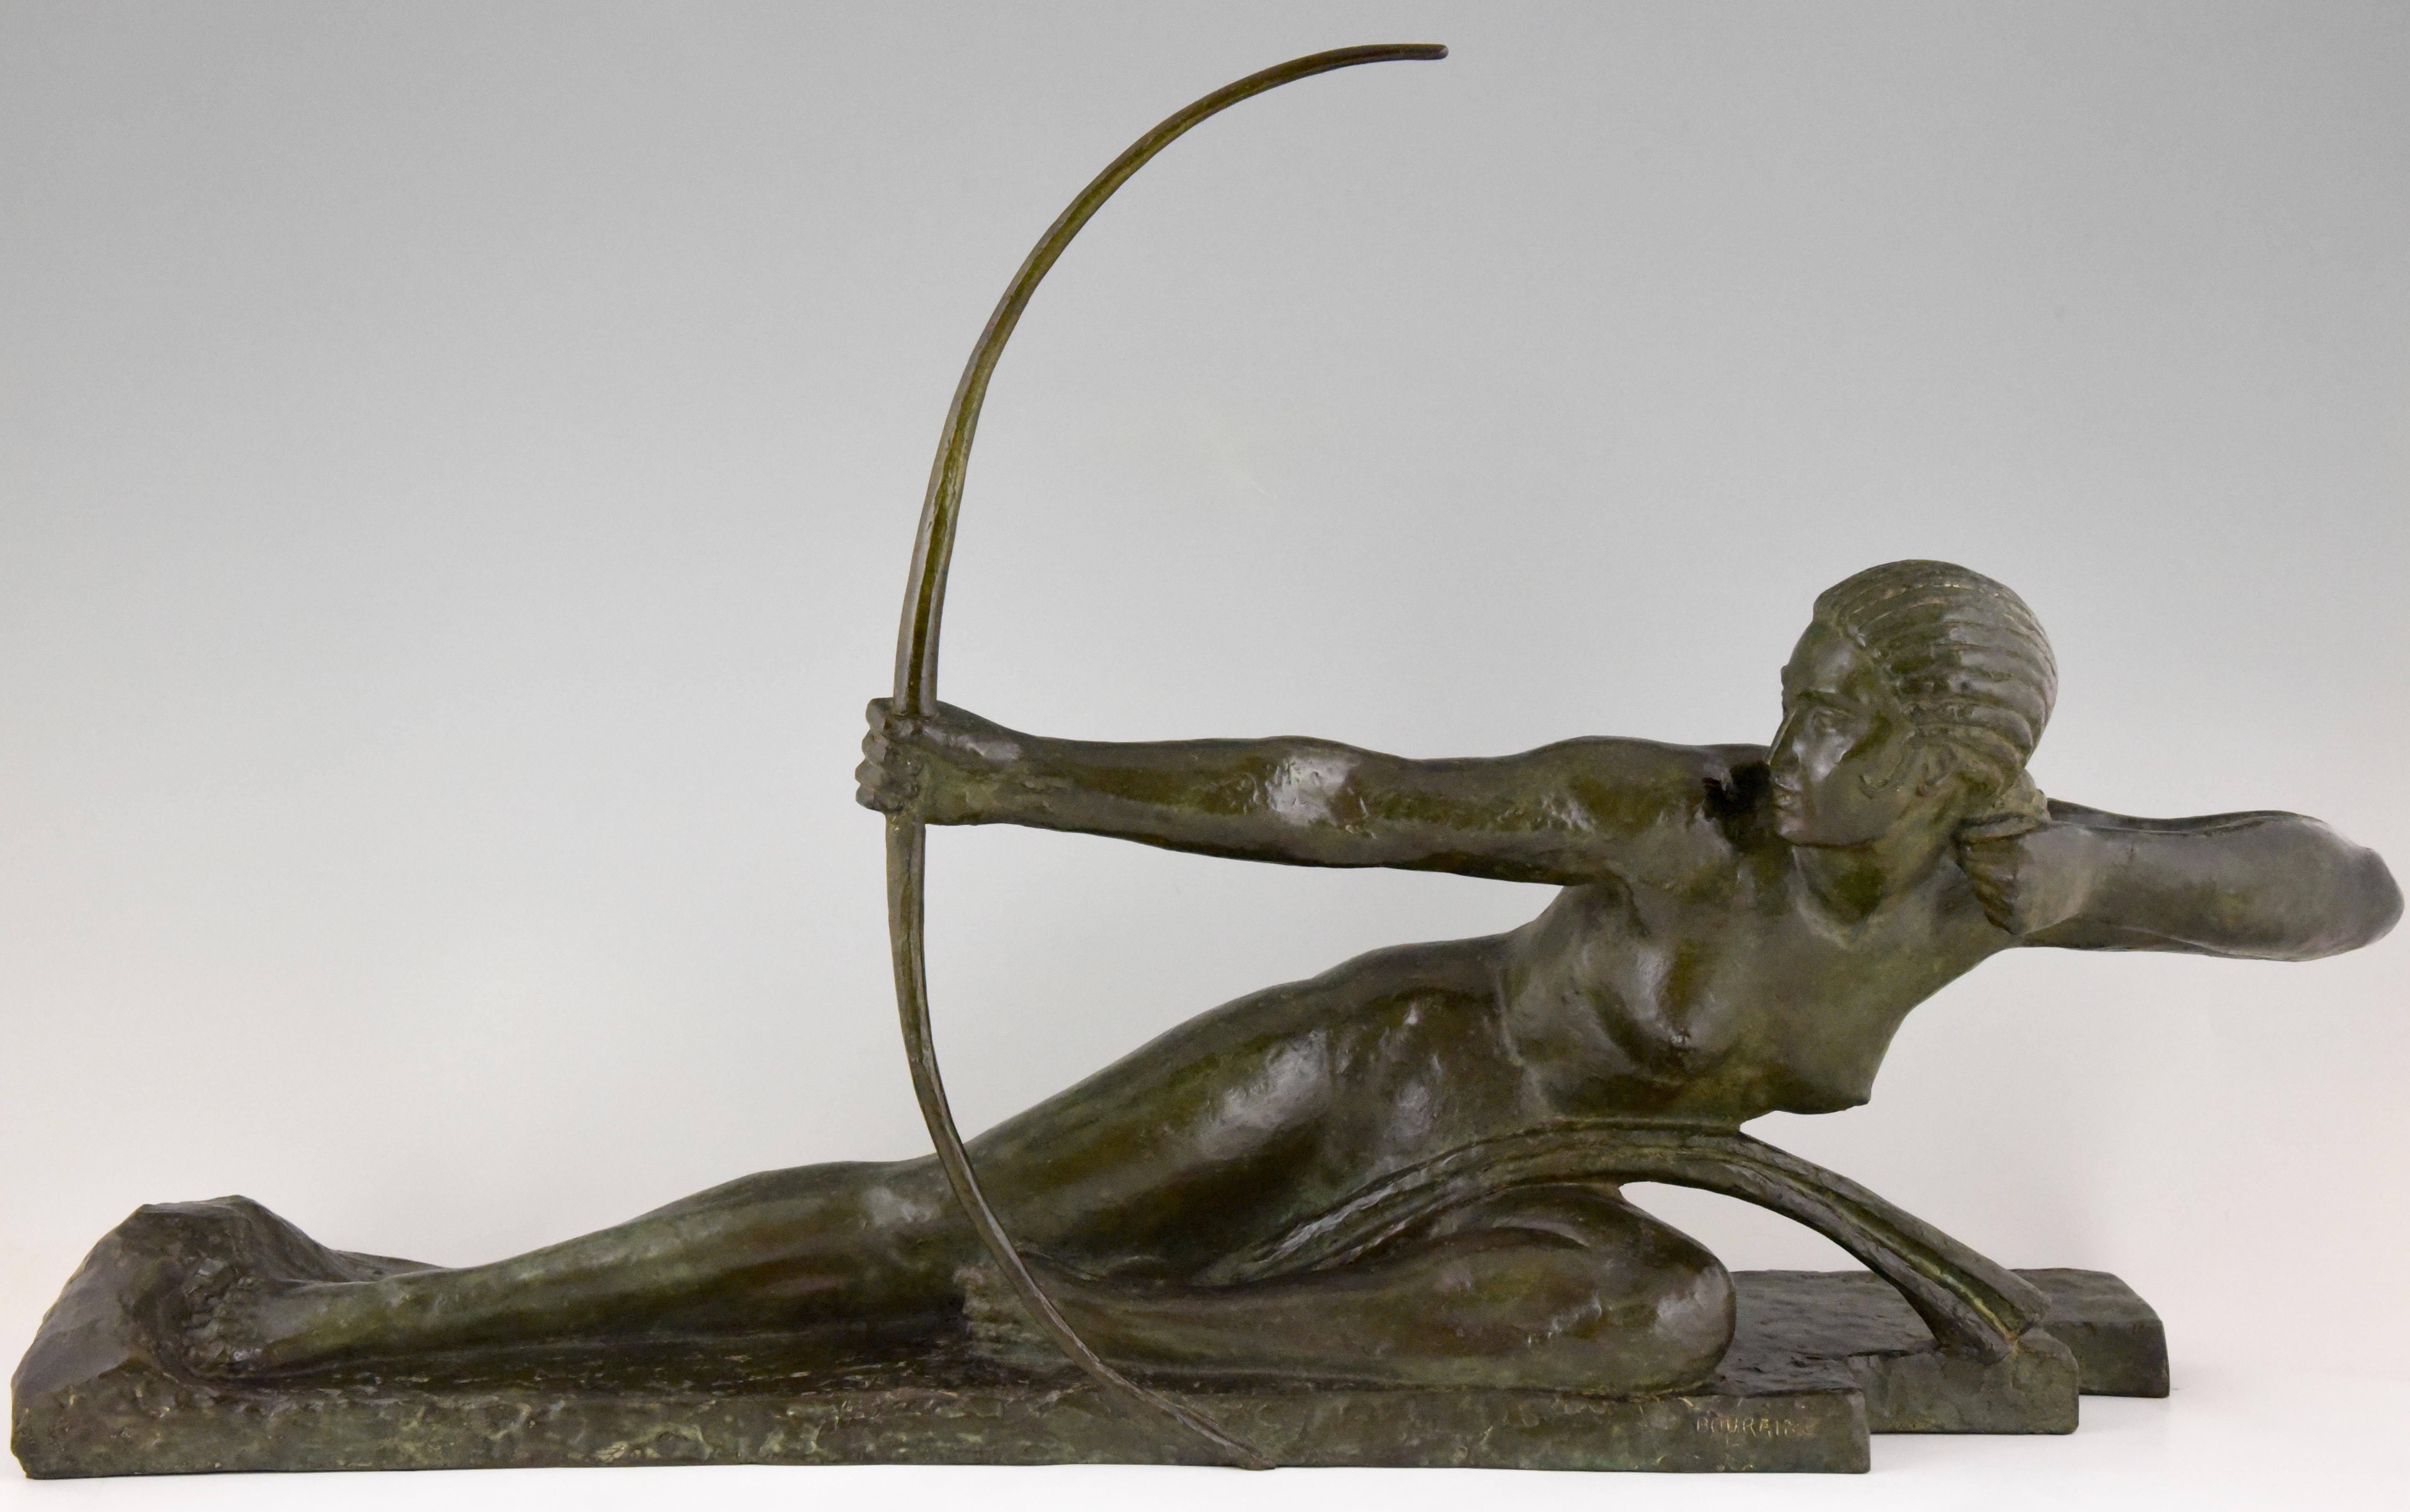 Impressive Art Deco bronze sculpture of a nude with bow picturing Penthesilia, queen of the Amazons. Signed by the famous French sculptor Marcel André Bouraine 1886-1948. Beautiful dark green patina.
This spectacular sculpture has the Susse Freres